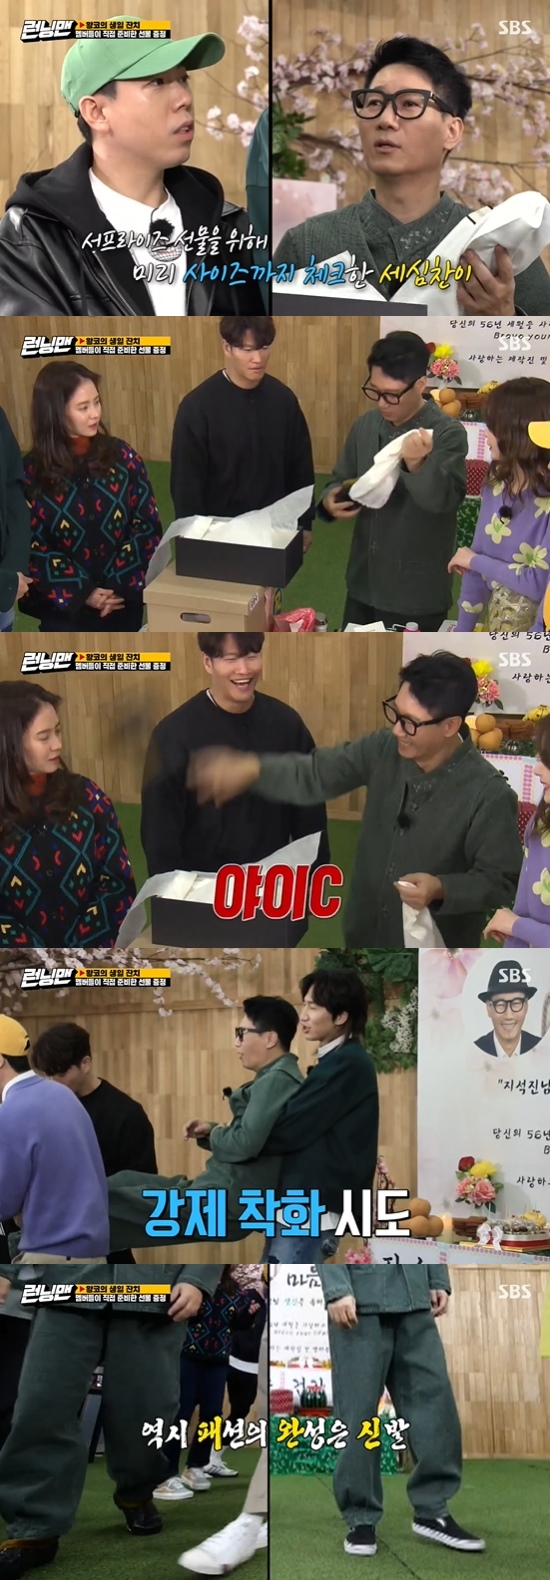 Running Man Ji Suk-jin laughed when he saw the members birthday presents.On the 28th SBS Good Sunday - Running Man, Ji Suk-jins birthday feast was held.Members were surprised to see Ji Suk-jins birthday prize, Lee Kwang-soo said, I was surprised to know that there was something bad.Yoo Jae-Suk said, The age is number, the mind is real. He said, The mind should change the number and the age really.Members prepared gifts for Ji Suk-jin, who said: Seok Jin-yi doesnt like gifts much, and he likes to give hope.For example, stock information, and Kim Jong-kook said, Or introduce a rich brother. The members were residents in the running village, and it was the birthday of the villages elder, Ji Suk-jin, actually the birthday of Ji Suk-jin, a day after the recording day.Ji Suk-jin, who appeared, complained, I thought I was wearing this, but the members did not care, but emphasized the health of Ji Suk-jins birthday.Ji Suk-jin, who saw his picture, said, I have a picture taken this time.Yoo Jae-Suk, who saw the phrase Bravo Yul Life, laughed when he said, Lets shout out, Zirabo.It is the oldest Variety, said Yoo Jae-Suk. There are few people who are Variety in their 60s life.Jeon So-min showed a dance performance for Ji Suk-jin, and Ji Suk-jin learned the charm of the classics, saying, I did not know why older seniors liked classical music, but it gets better.The members then took out the gifts prepared for Ji Suk-jin.Jeon So-min handed over the dead lady, and Ji Suk-jin laughed, saying, I have a wife.Yoo Jae-Suk prepared the gateball for the home-beater Ji Suk-jin, who said: This is not the age to do this.I do a powerful thing, but Yoo Jae-Suk did not care.Kim Jong-kooks gift was a protein for the elderly.Song Ji-hyo prepared a scalp care shampoo and Lee Kwang-soo prepared Soap Bubbles for use in increasing lung capacity.Ji Suk-jin said, Are you worried enough for me to do this? but blew Soap Bubbles.Yang presented a mission bag and handed it a luxury box saying, Its a joke, this is real. Ji Suk-jin could not hide his smile, saying, I do not like luxury goods.But it was rubber gods that came out, and Ji Suk-jin threw rubber gods; Yoo Jae-Suk said, This is K - Ug, and that it matches Ji Suk-jins costume.The last was a gift from Haha: a one-man sofa, a drawing book, and a painter hat; Ji Suk-jin also hit a gateball presented by Yoo Jae-Suk.Photo = SBS Broadcasting Screen